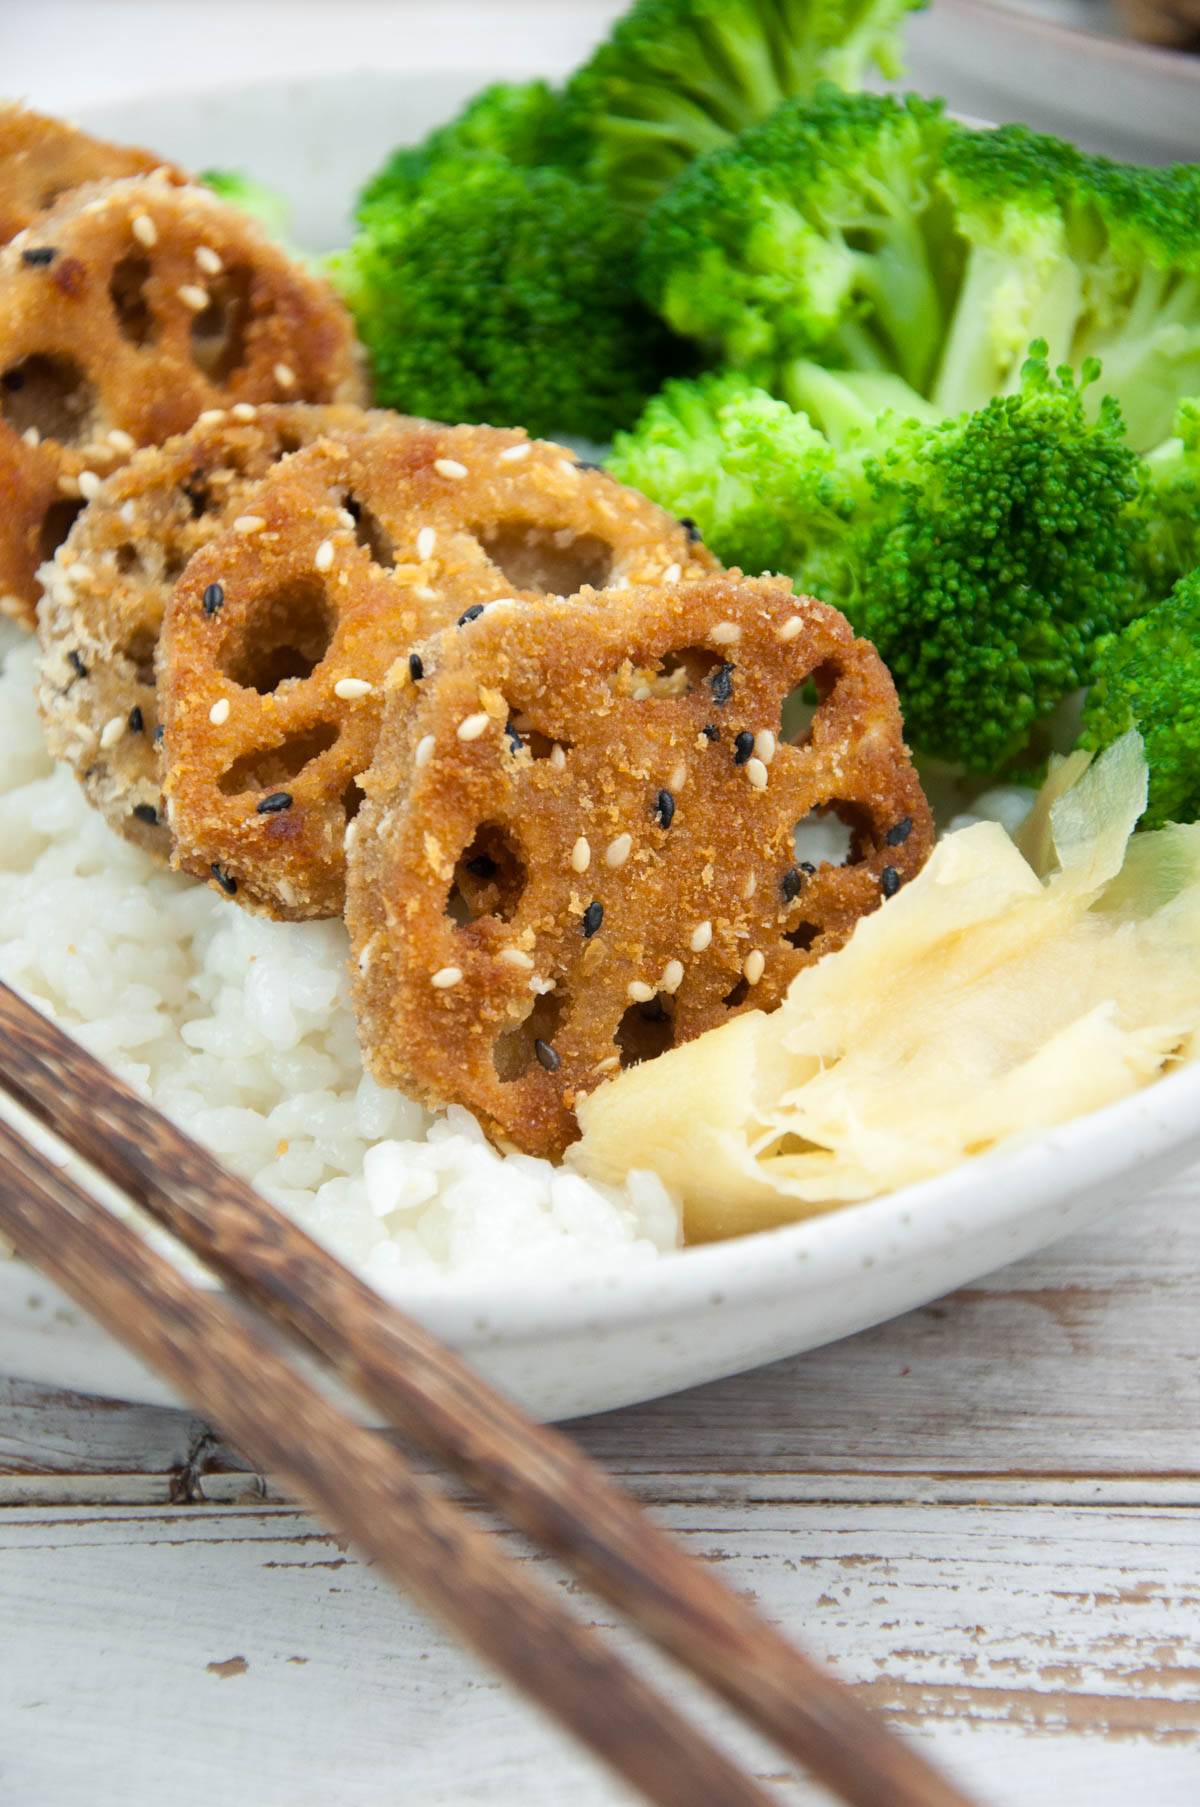 Breaded & Fried Lotus Root served with rice, broccoli and ginger